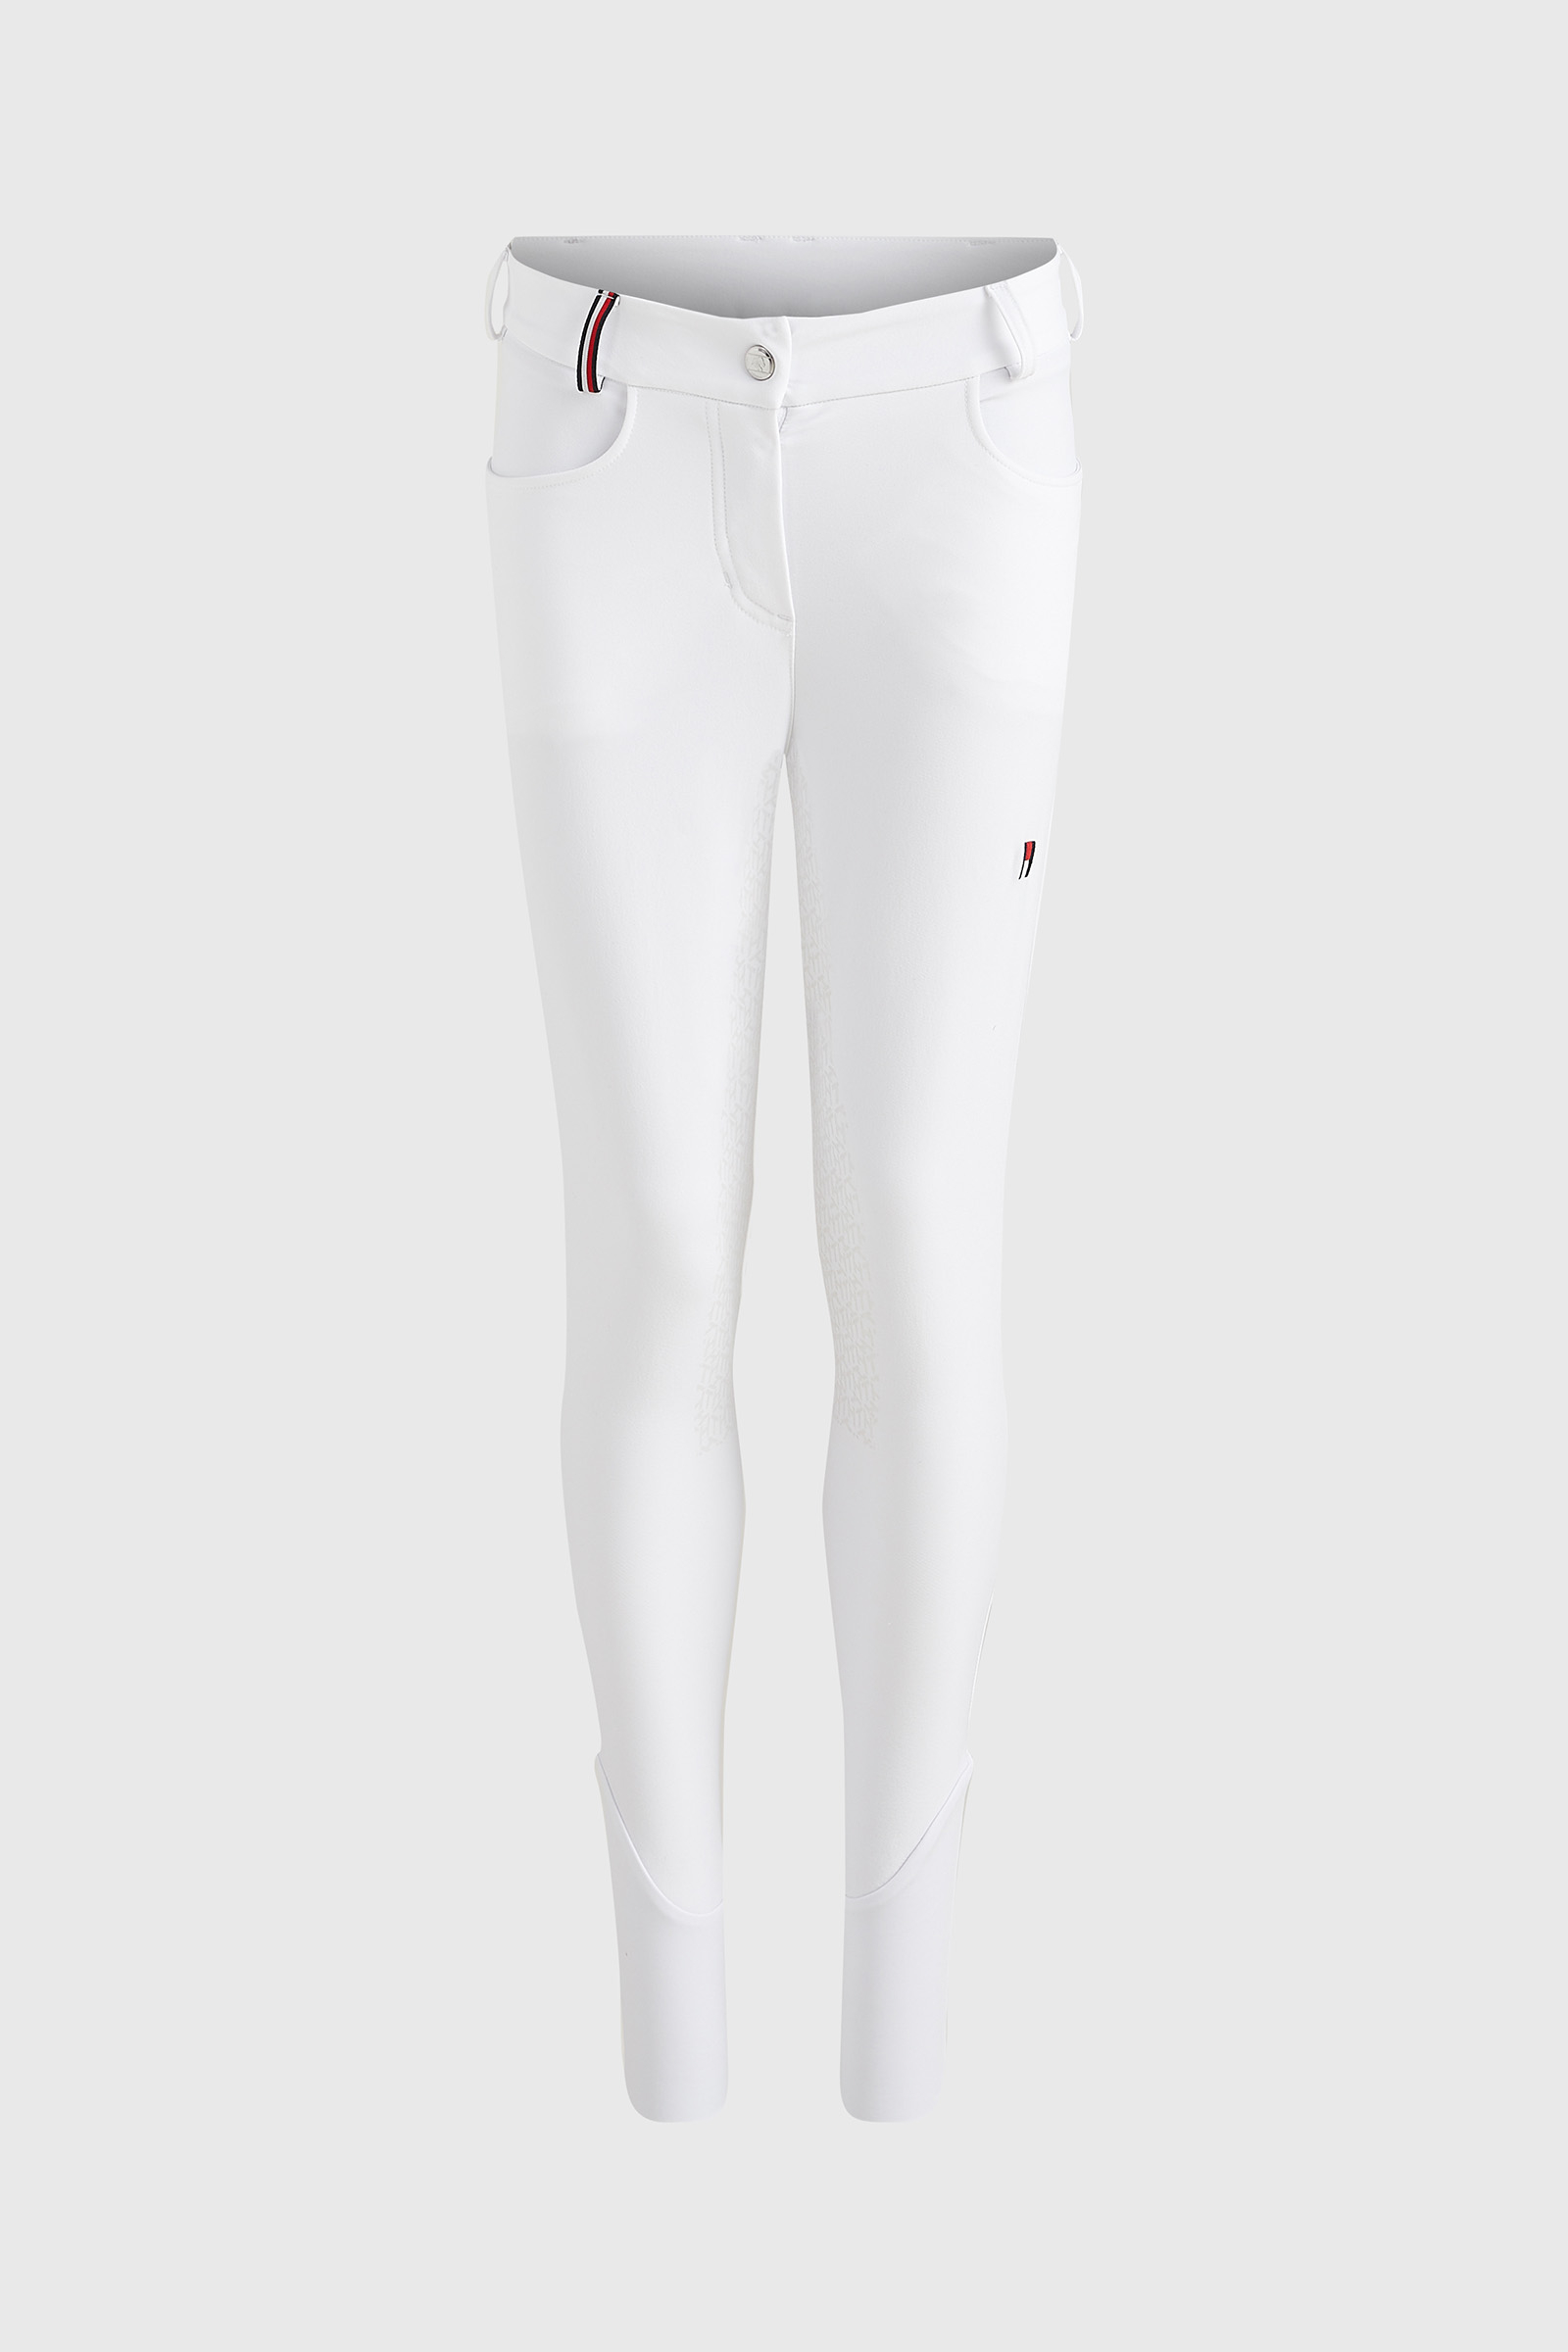 Buy Horze Anna Women's Silicone Full Seat Breeches with Phone Pocket